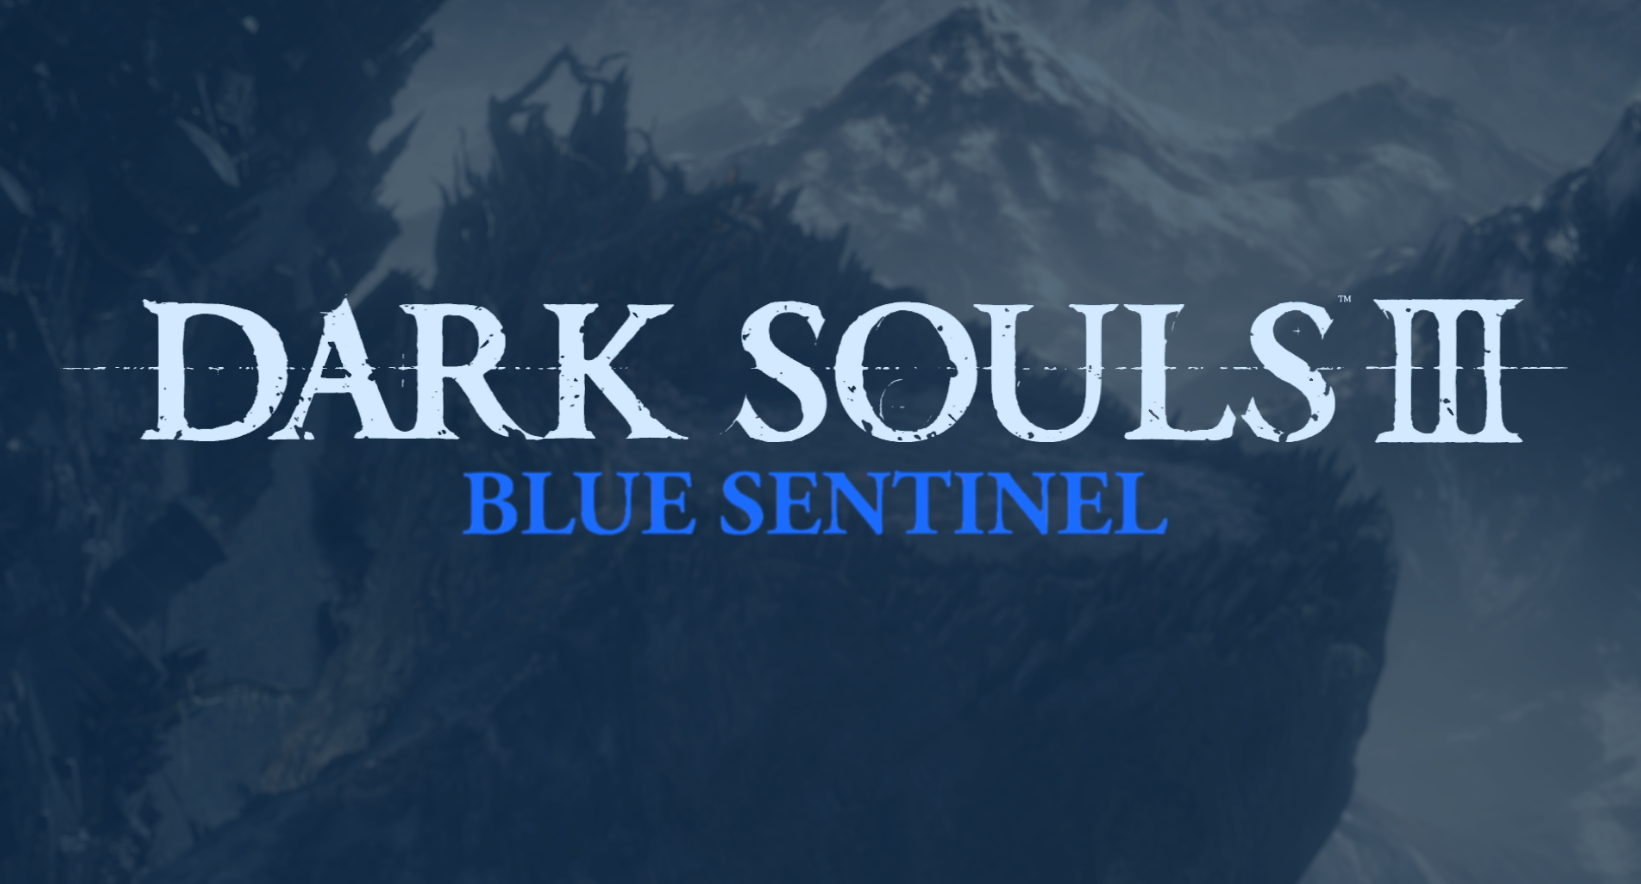 DARK SOULS™ III Protecting Your Save File From The NG+ Hack - Protection 2: Blue Sentinel